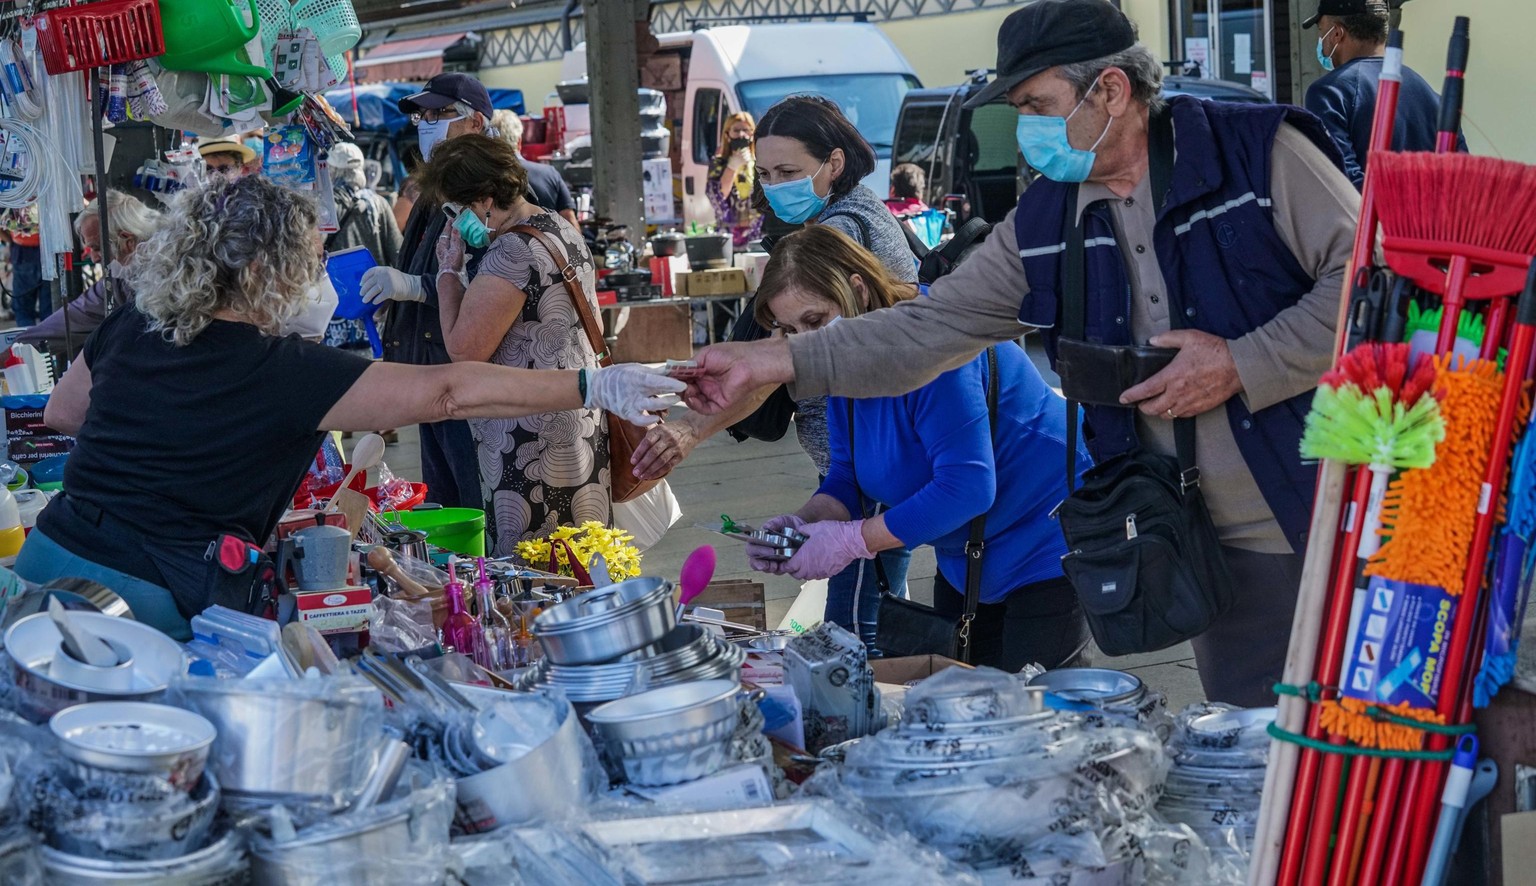 epa08433287 People at Porta Palazzo market during the Phase 2 of the COVID-19 emergency, Turin, Italy, 20 May 2020. Italy is gradually easing lockdown measures implemented to stem the spread of the SA ...